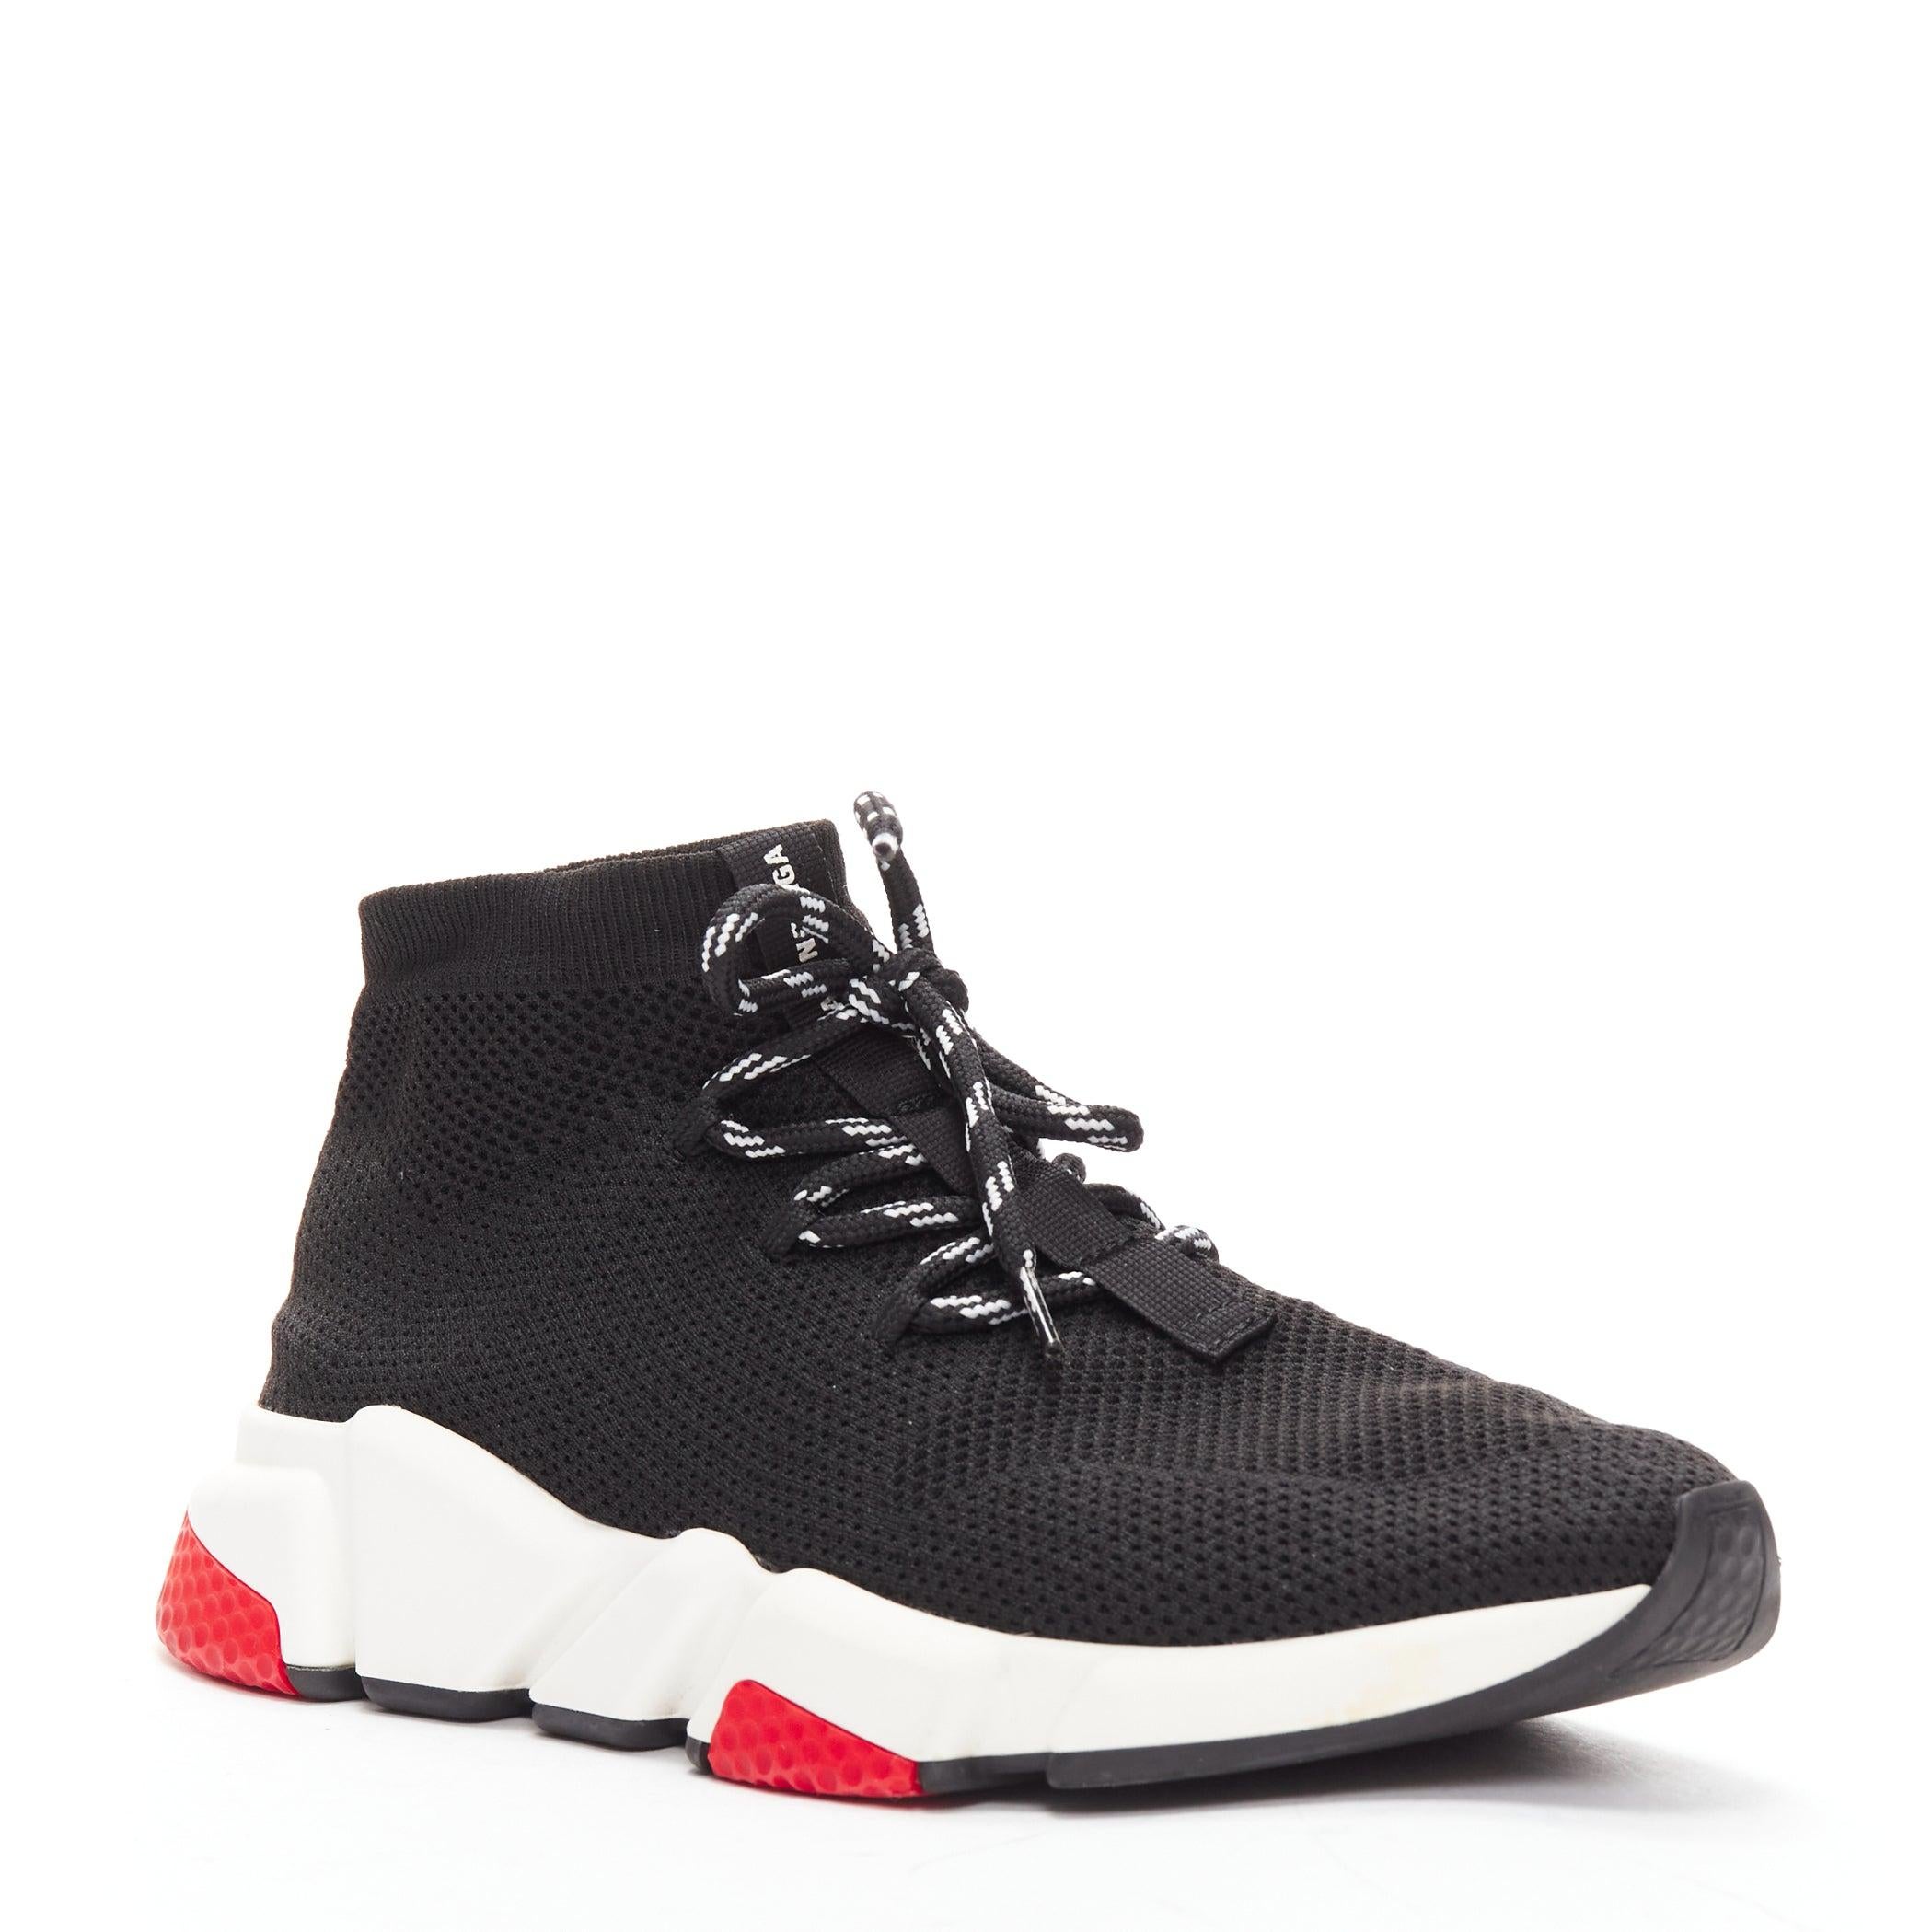 BALENCIAGA Speed black white red logo laced sock sneakers EU40
Reference: CELE/A00011
Brand: Balenciaga
Model: Speed
Material: Fabric
Color: Black, White
Pattern: Solid
Closure: Lace Up
Lining: Black Fabric
Extra Details: Logo tape at front